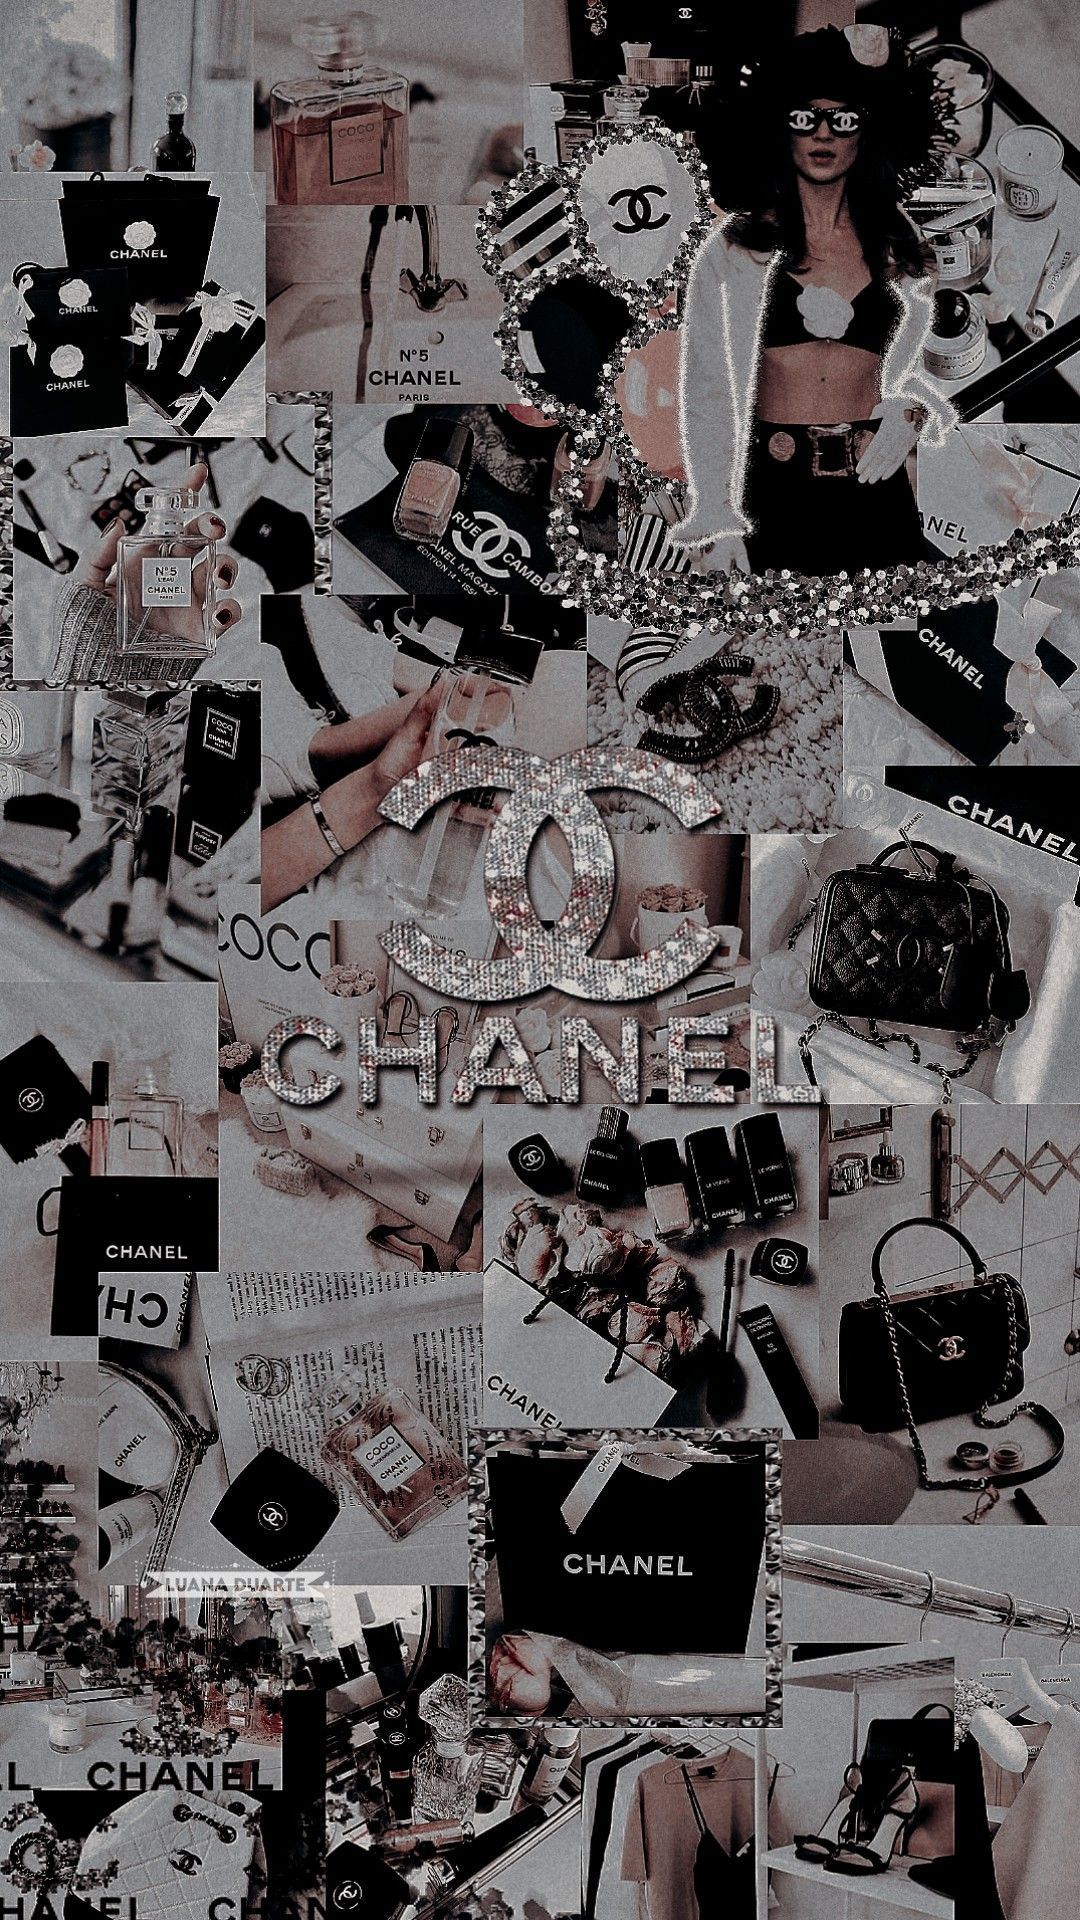 A collage of chanel products and logos - Chanel